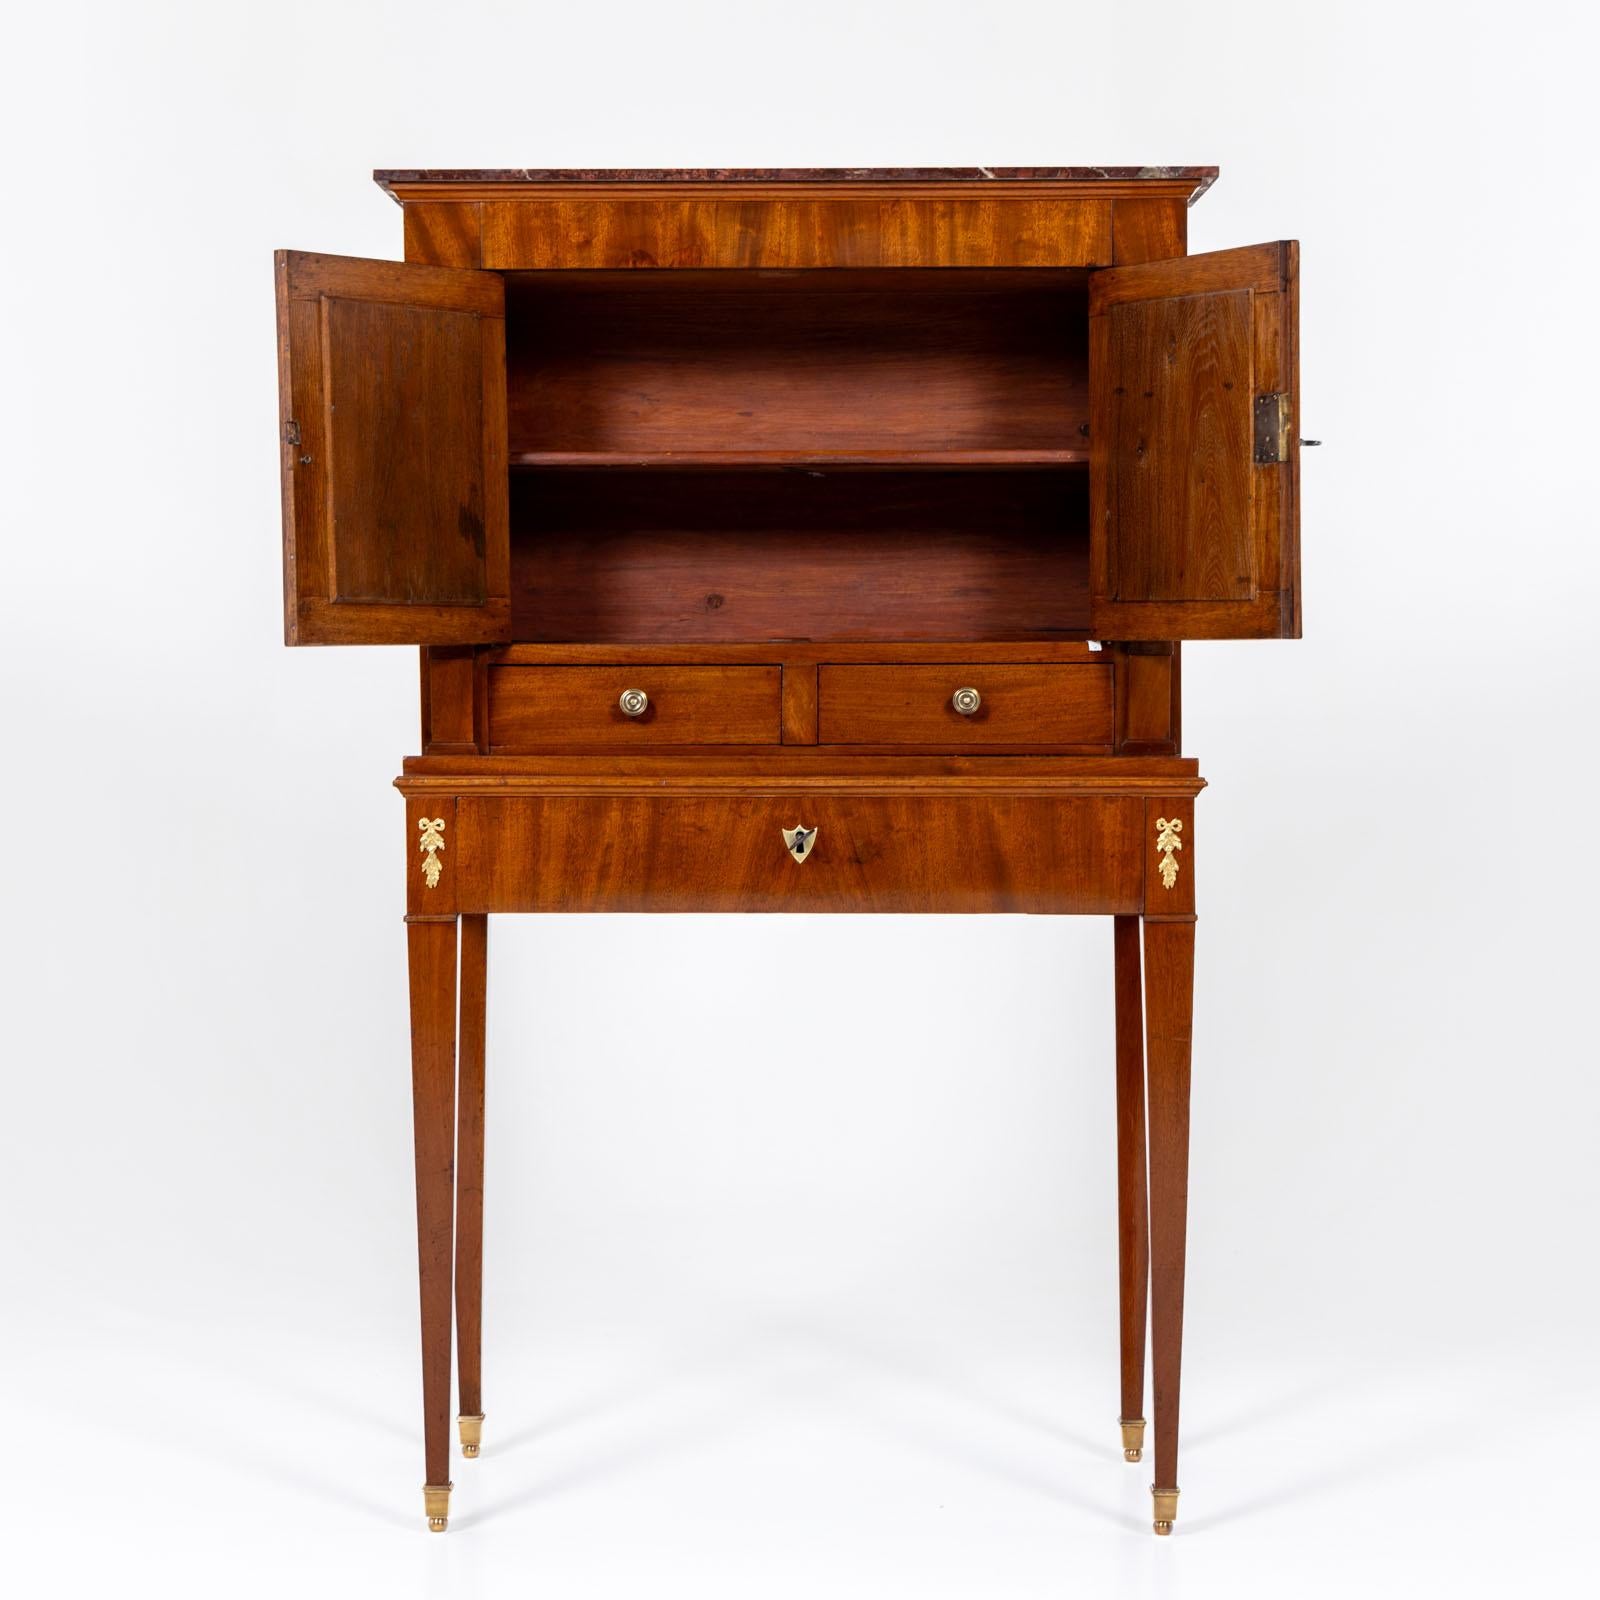 Two-door Bonheur du Jour ladies' secretaire standing on tall, tapered legs with brass sabots, featuring a leather-covered writing surface in the lower drawer and compartments for inkwells and penholders. The writing surface slides open to reveal